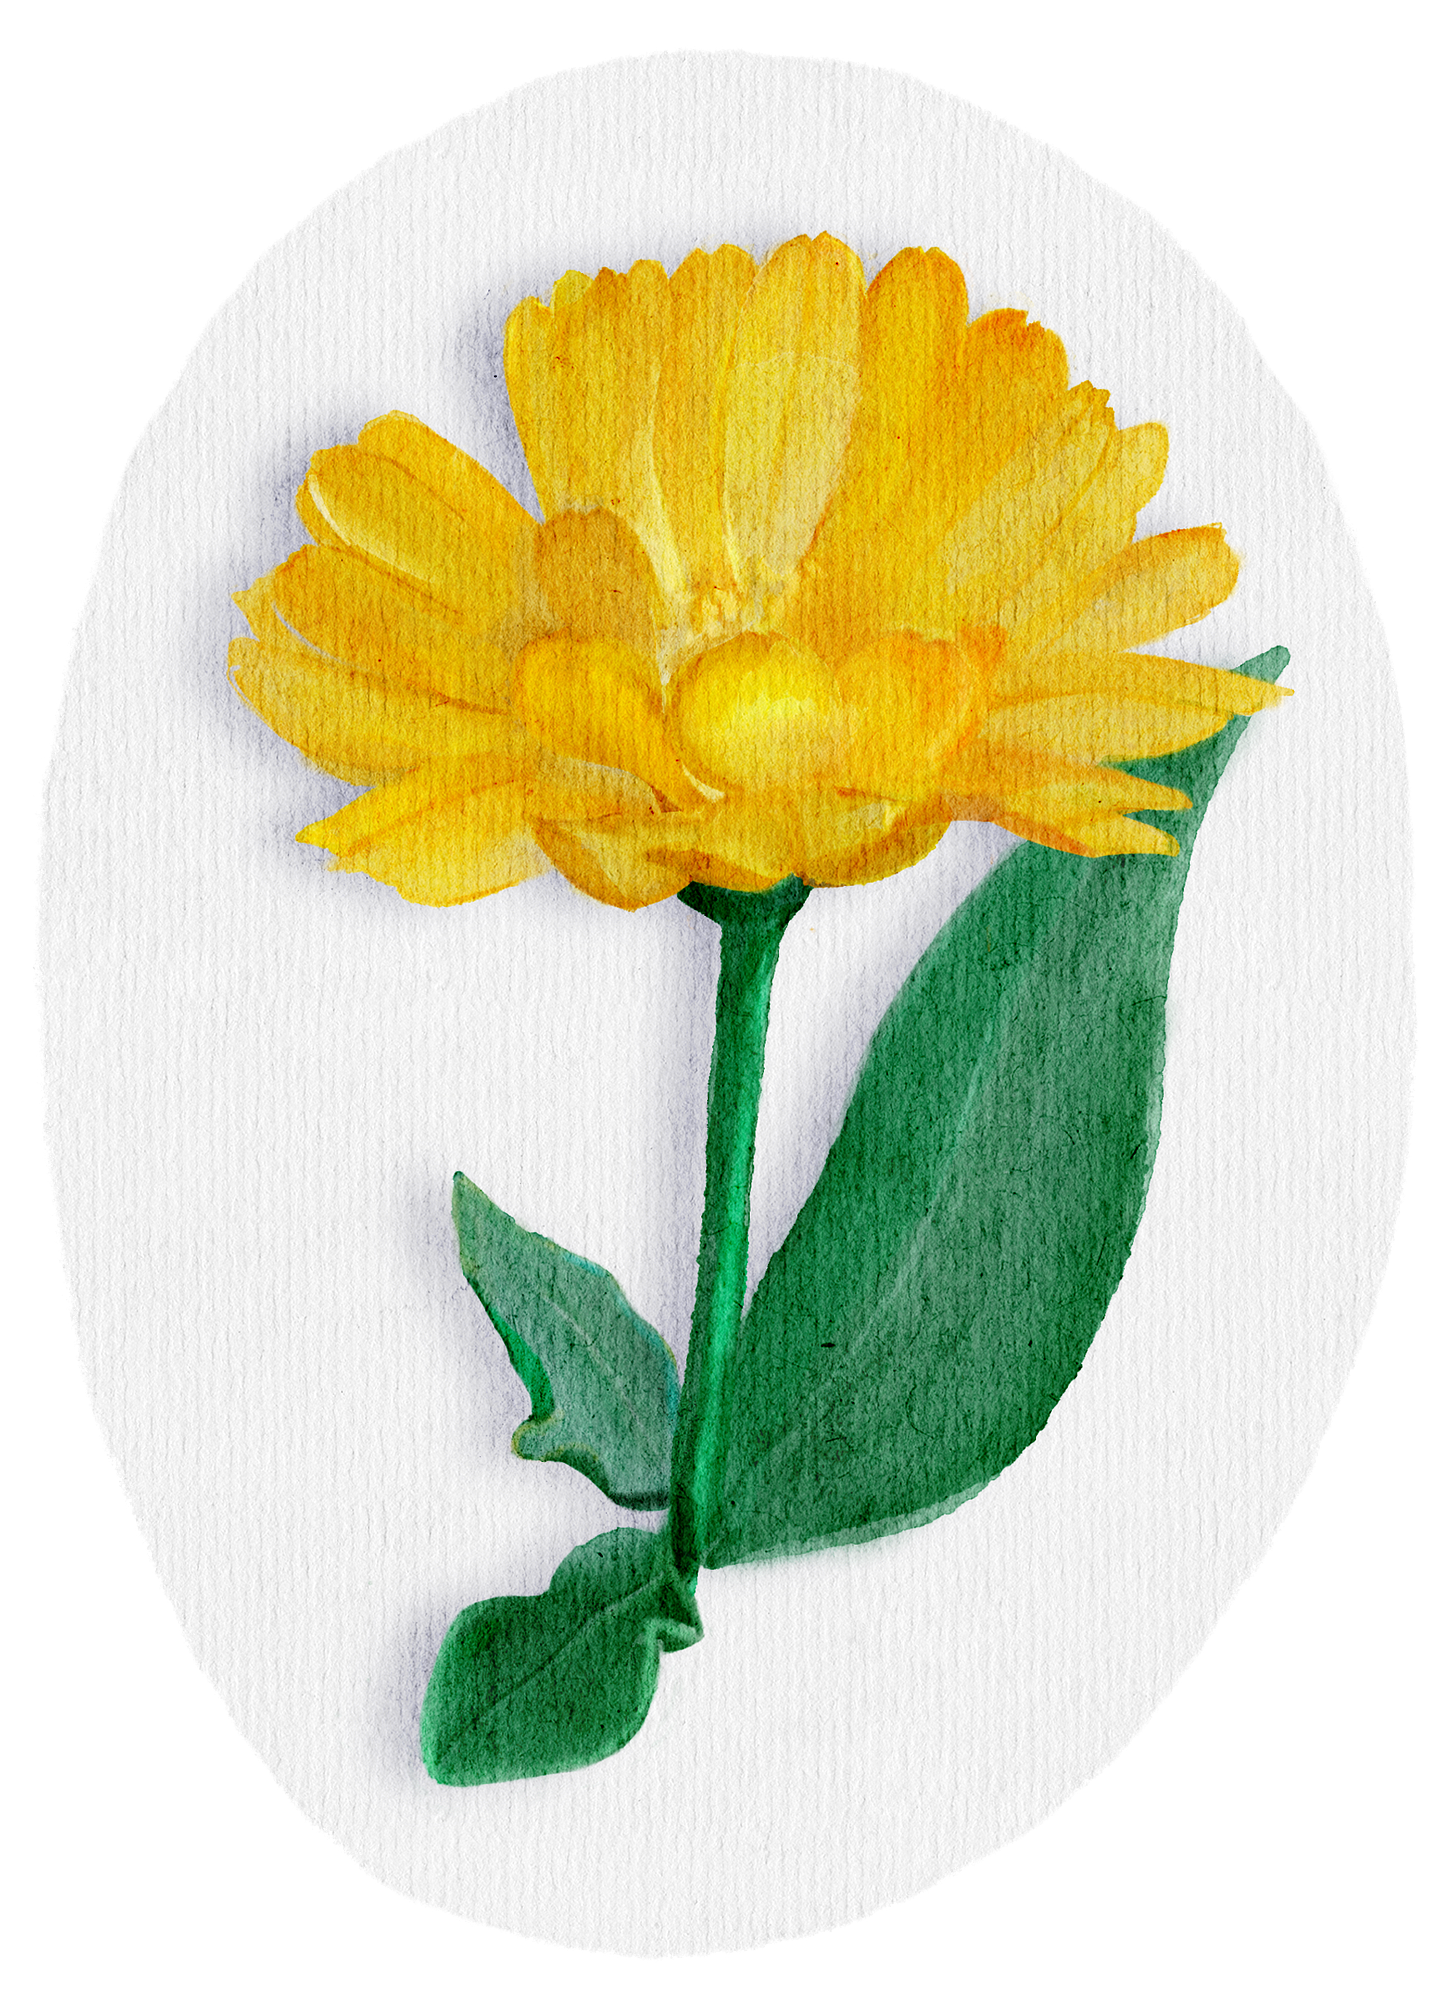 Watercolour painting of a pot marigold. Golden-yellow flower with many petals.